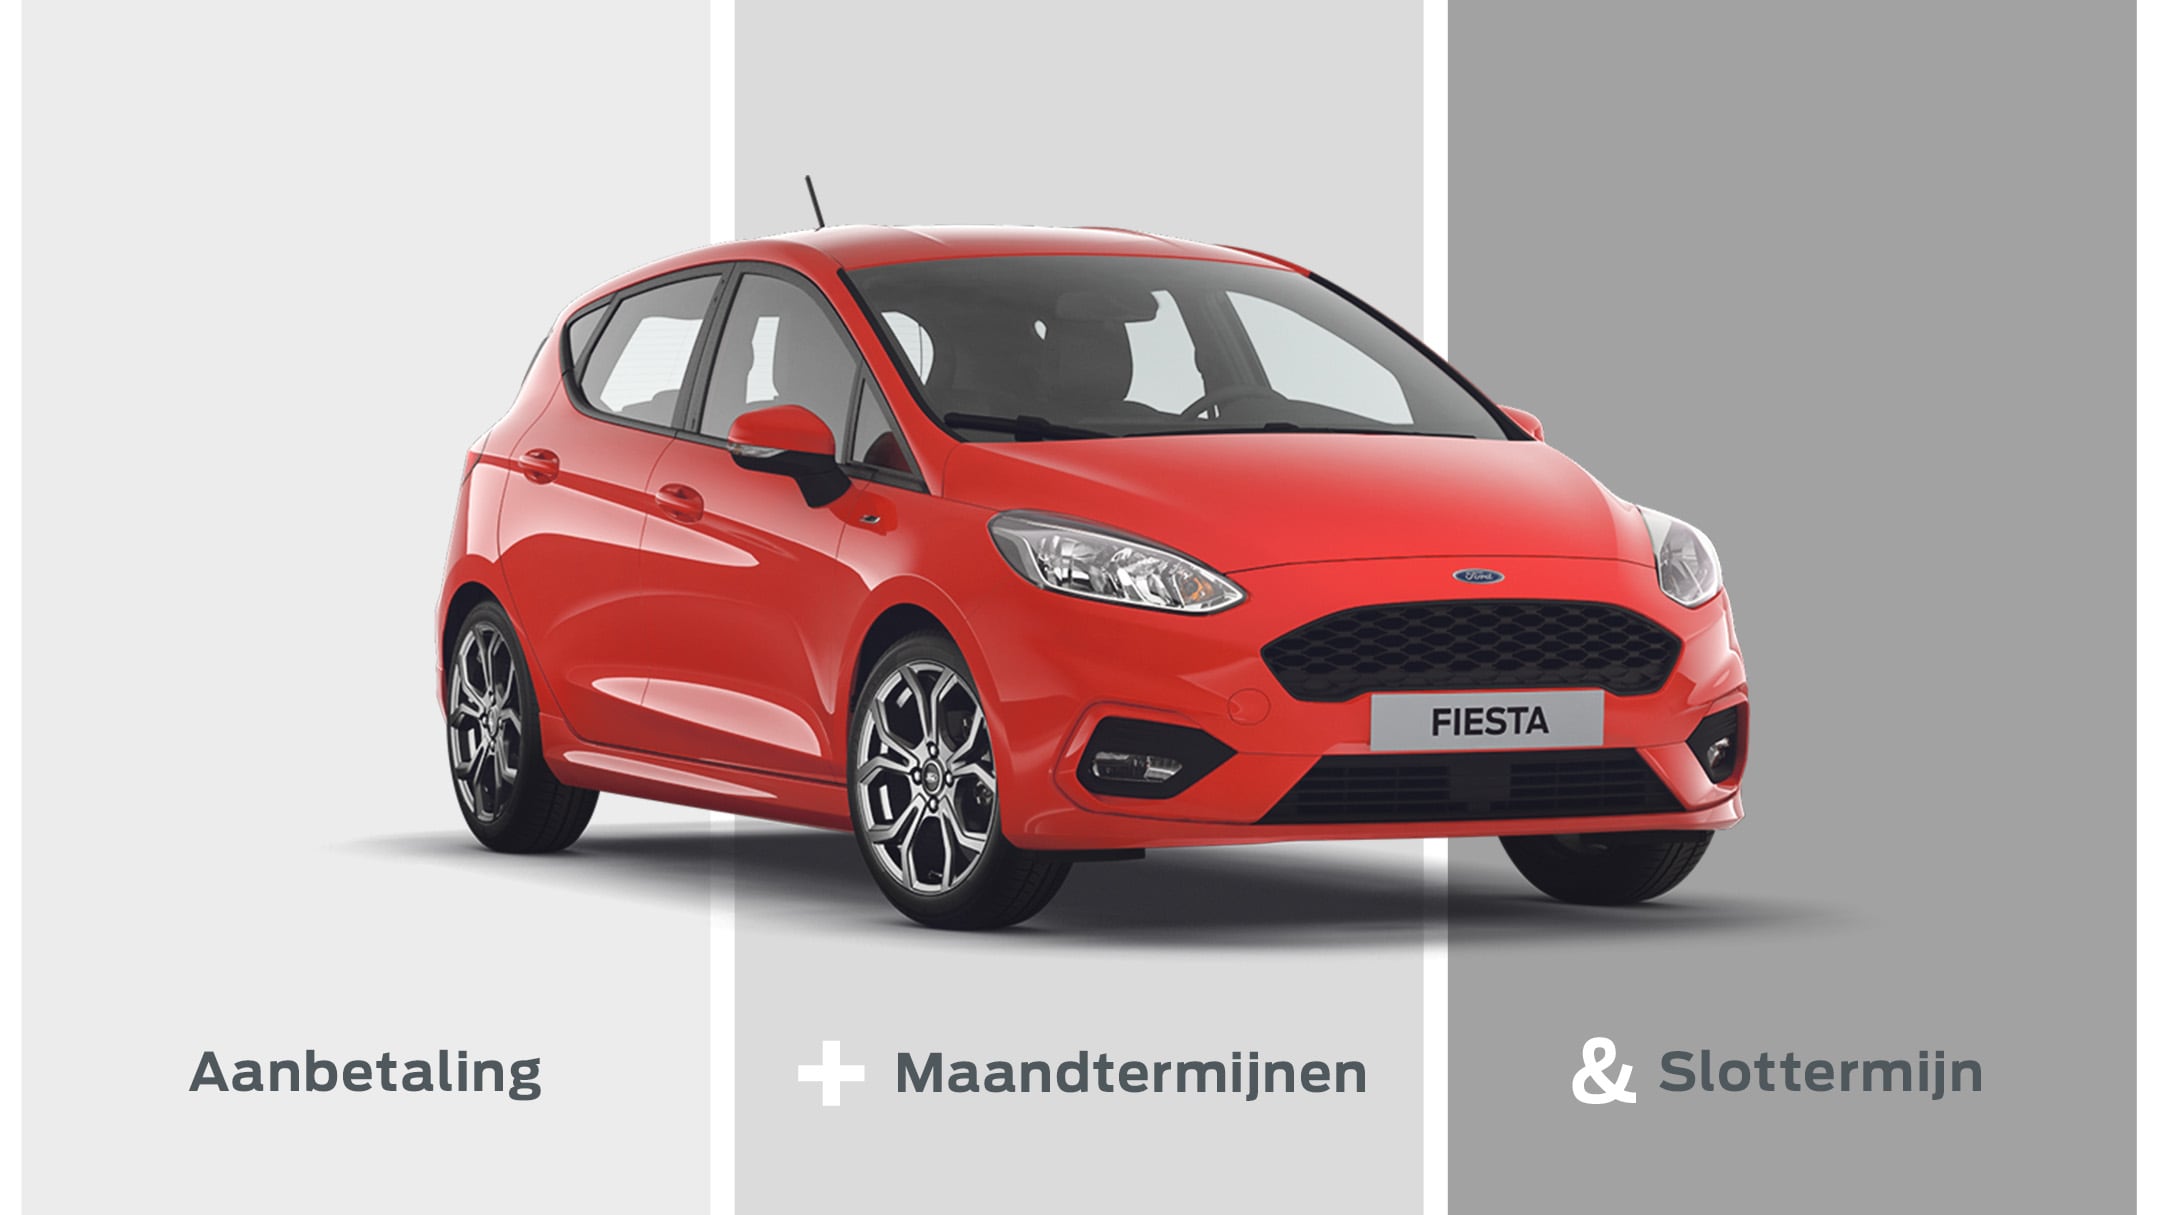 Ford Fiesta image split into deposit, monthly payments and optional final payment.